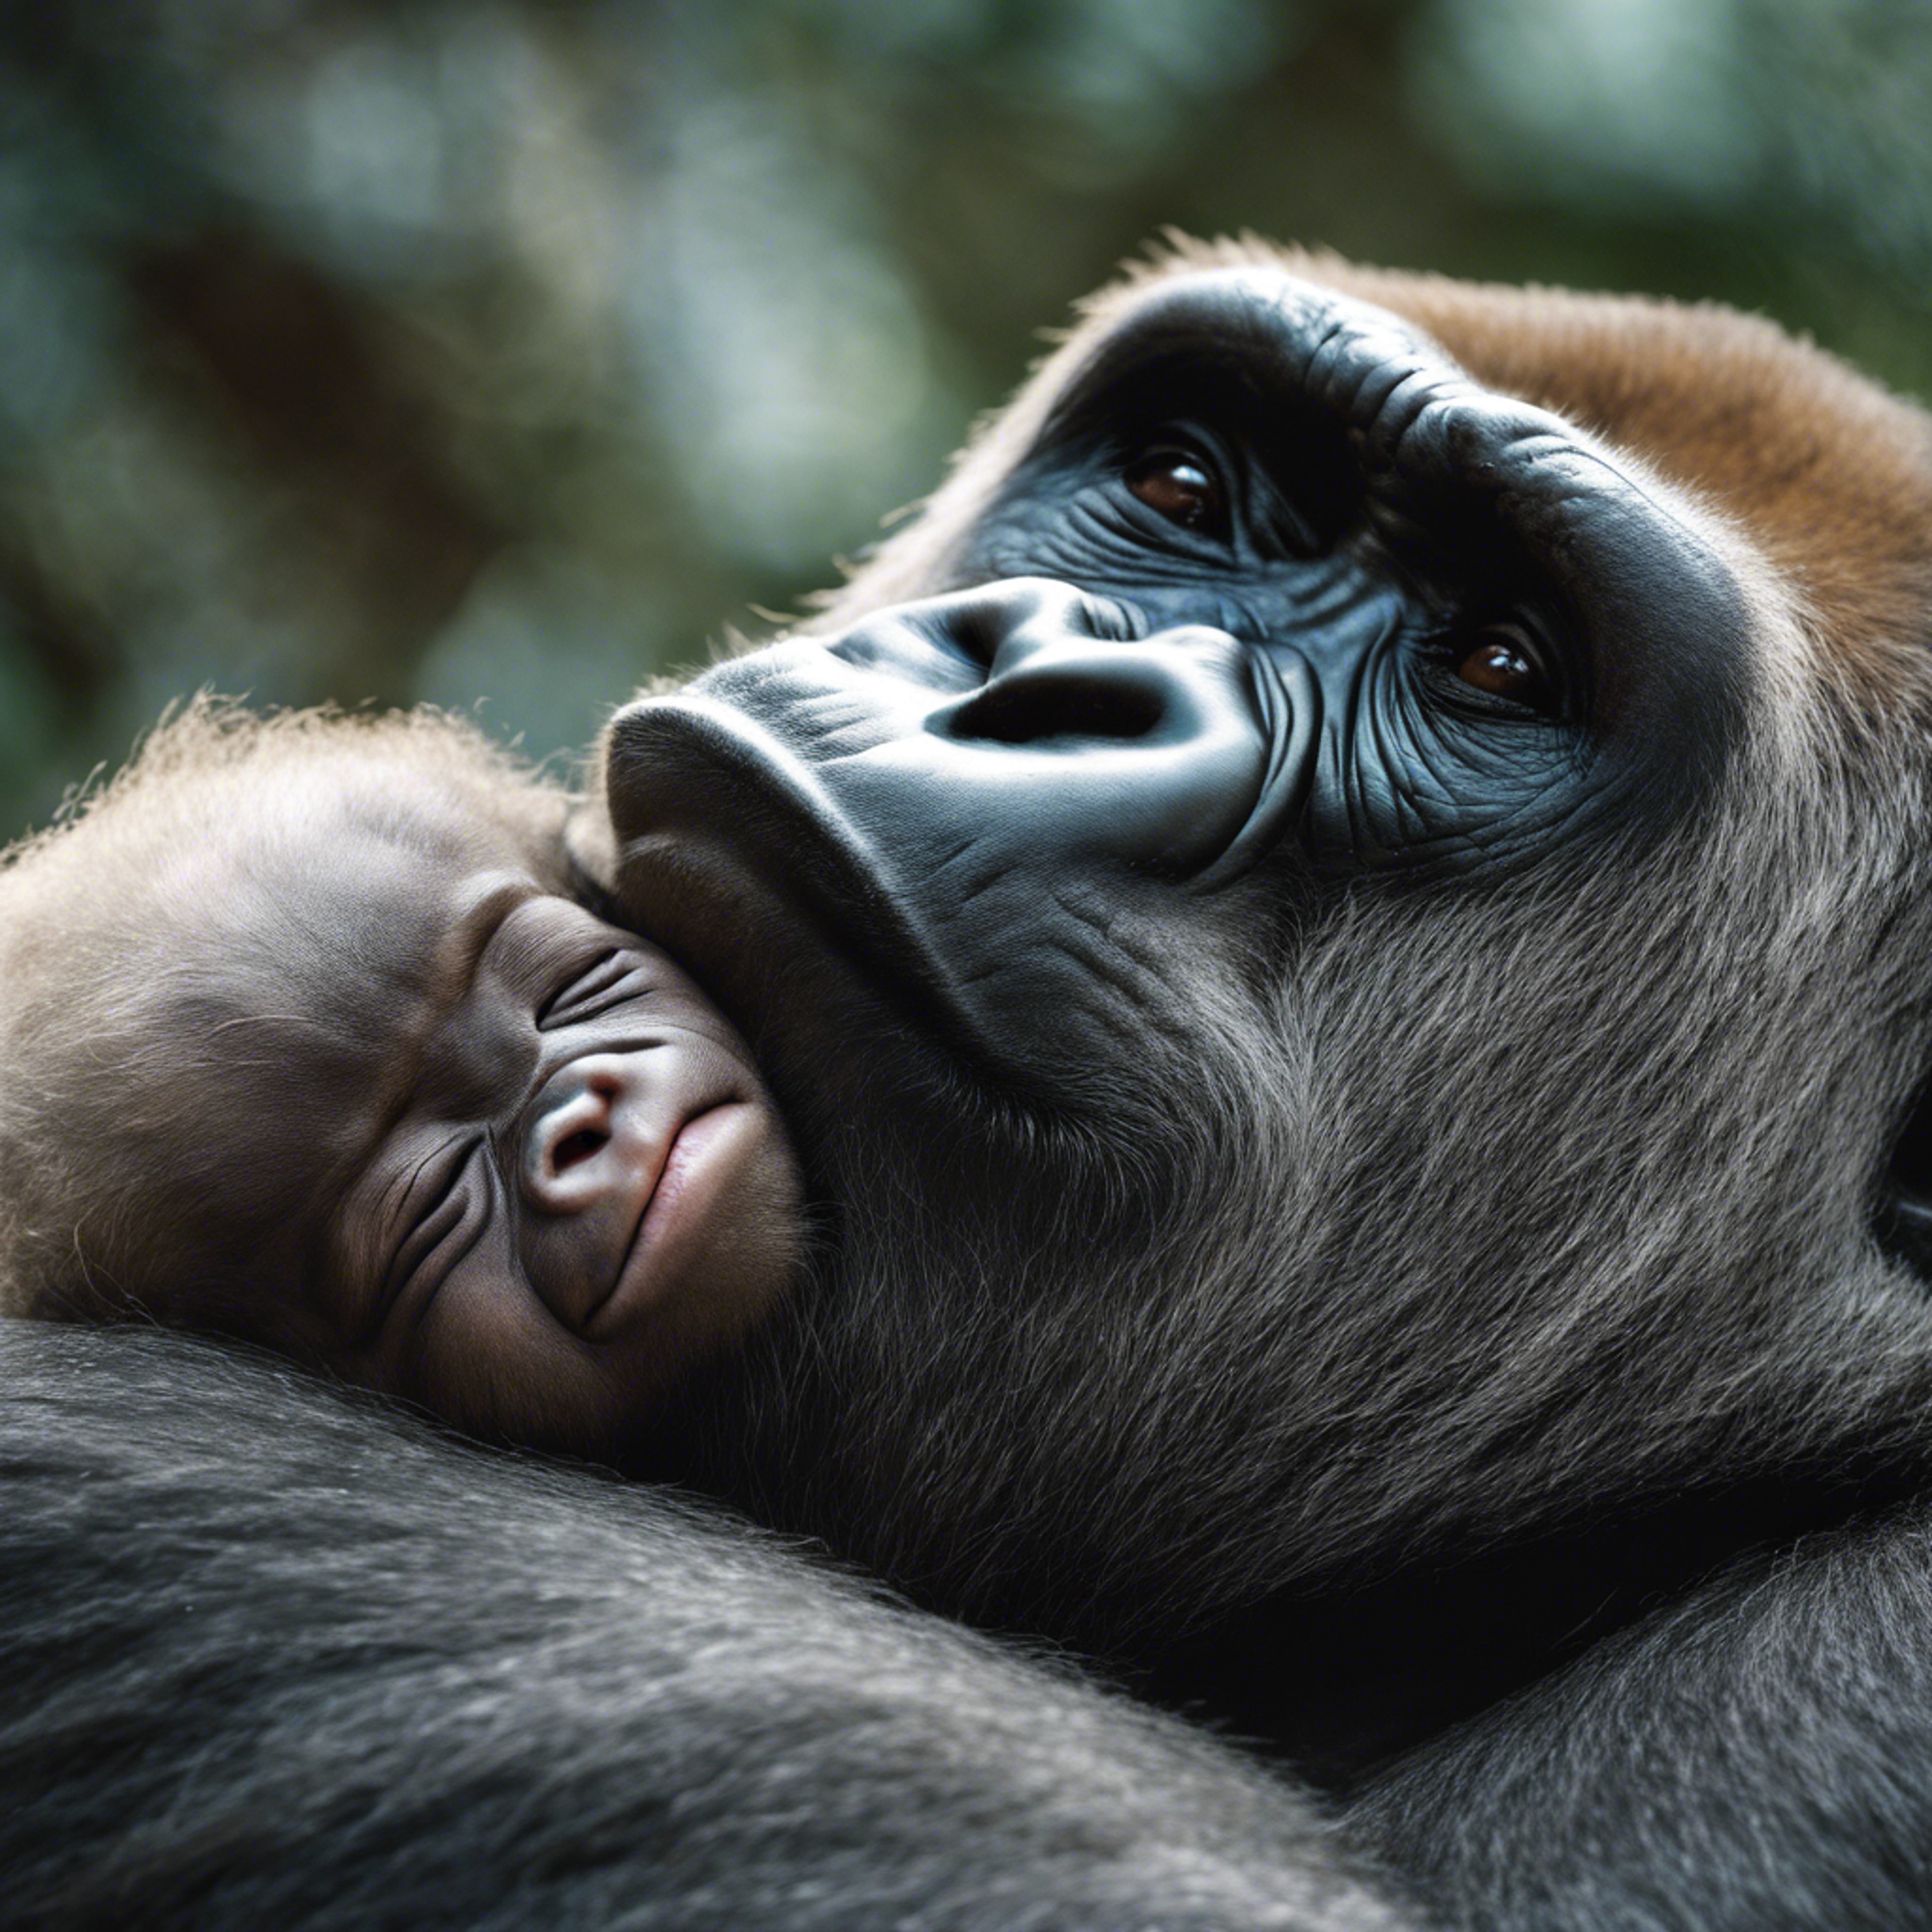 A close-up, emotional study of a gorilla mother's face as she cradles her sleeping newborn. Валлпапер[516e0f2ed6254482ad03]